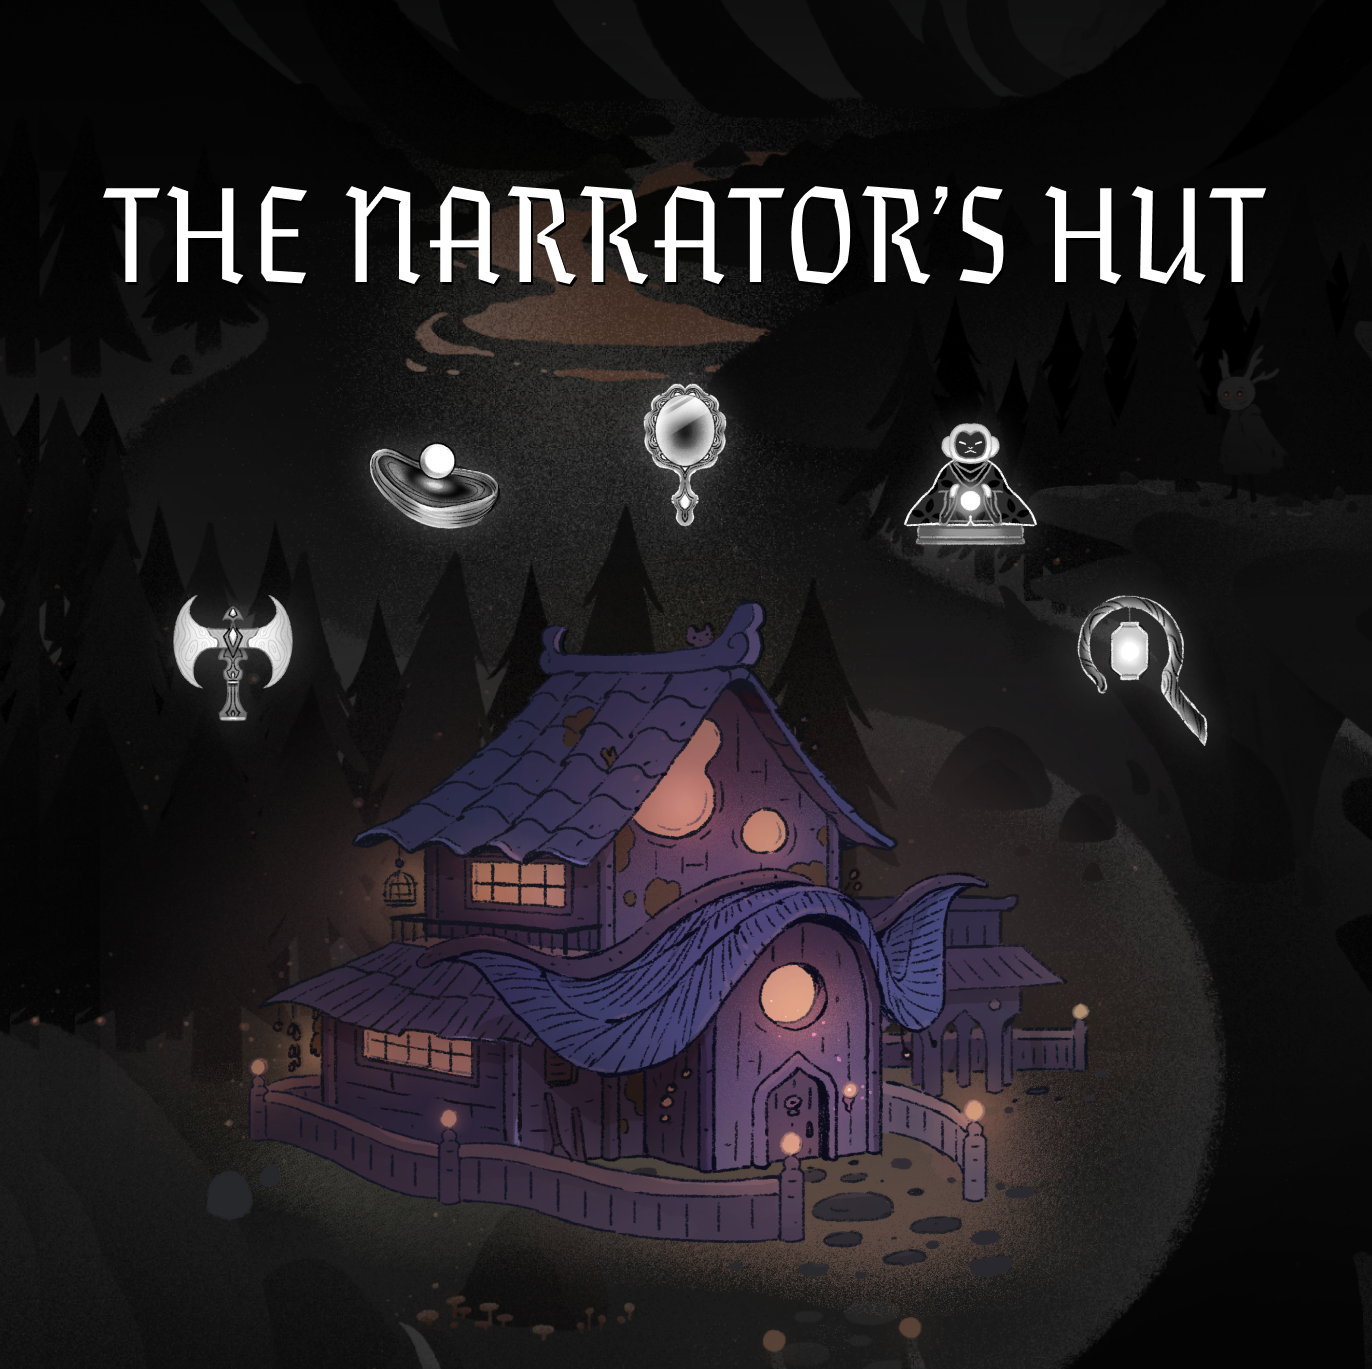 THE NARRATOR'S HUT at the heart of the wilds